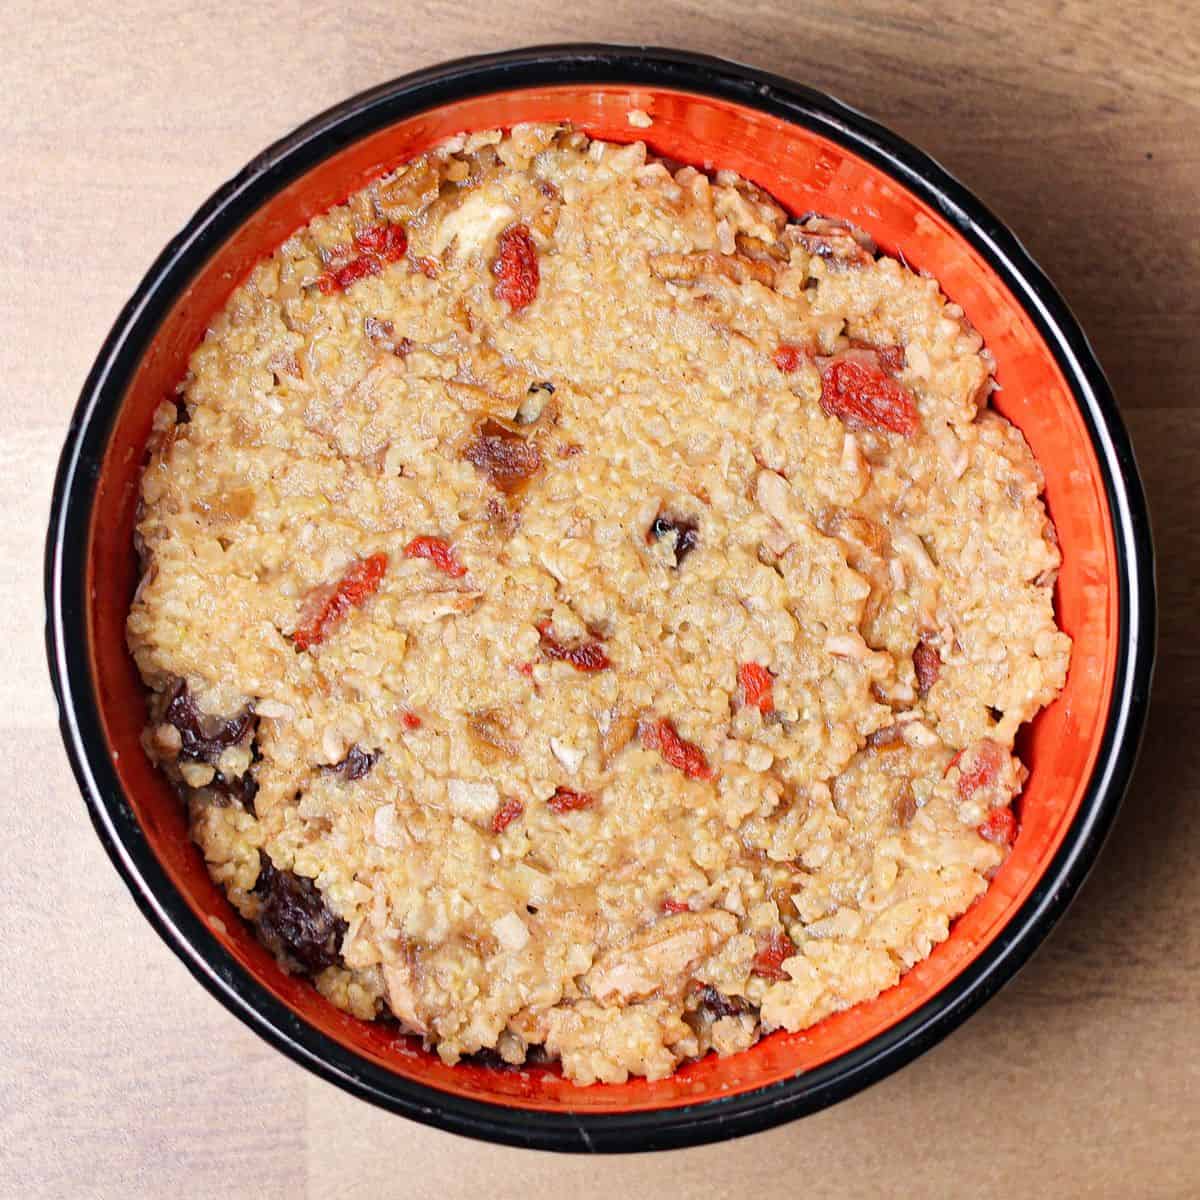 The image served the millet porridge into a bowl.